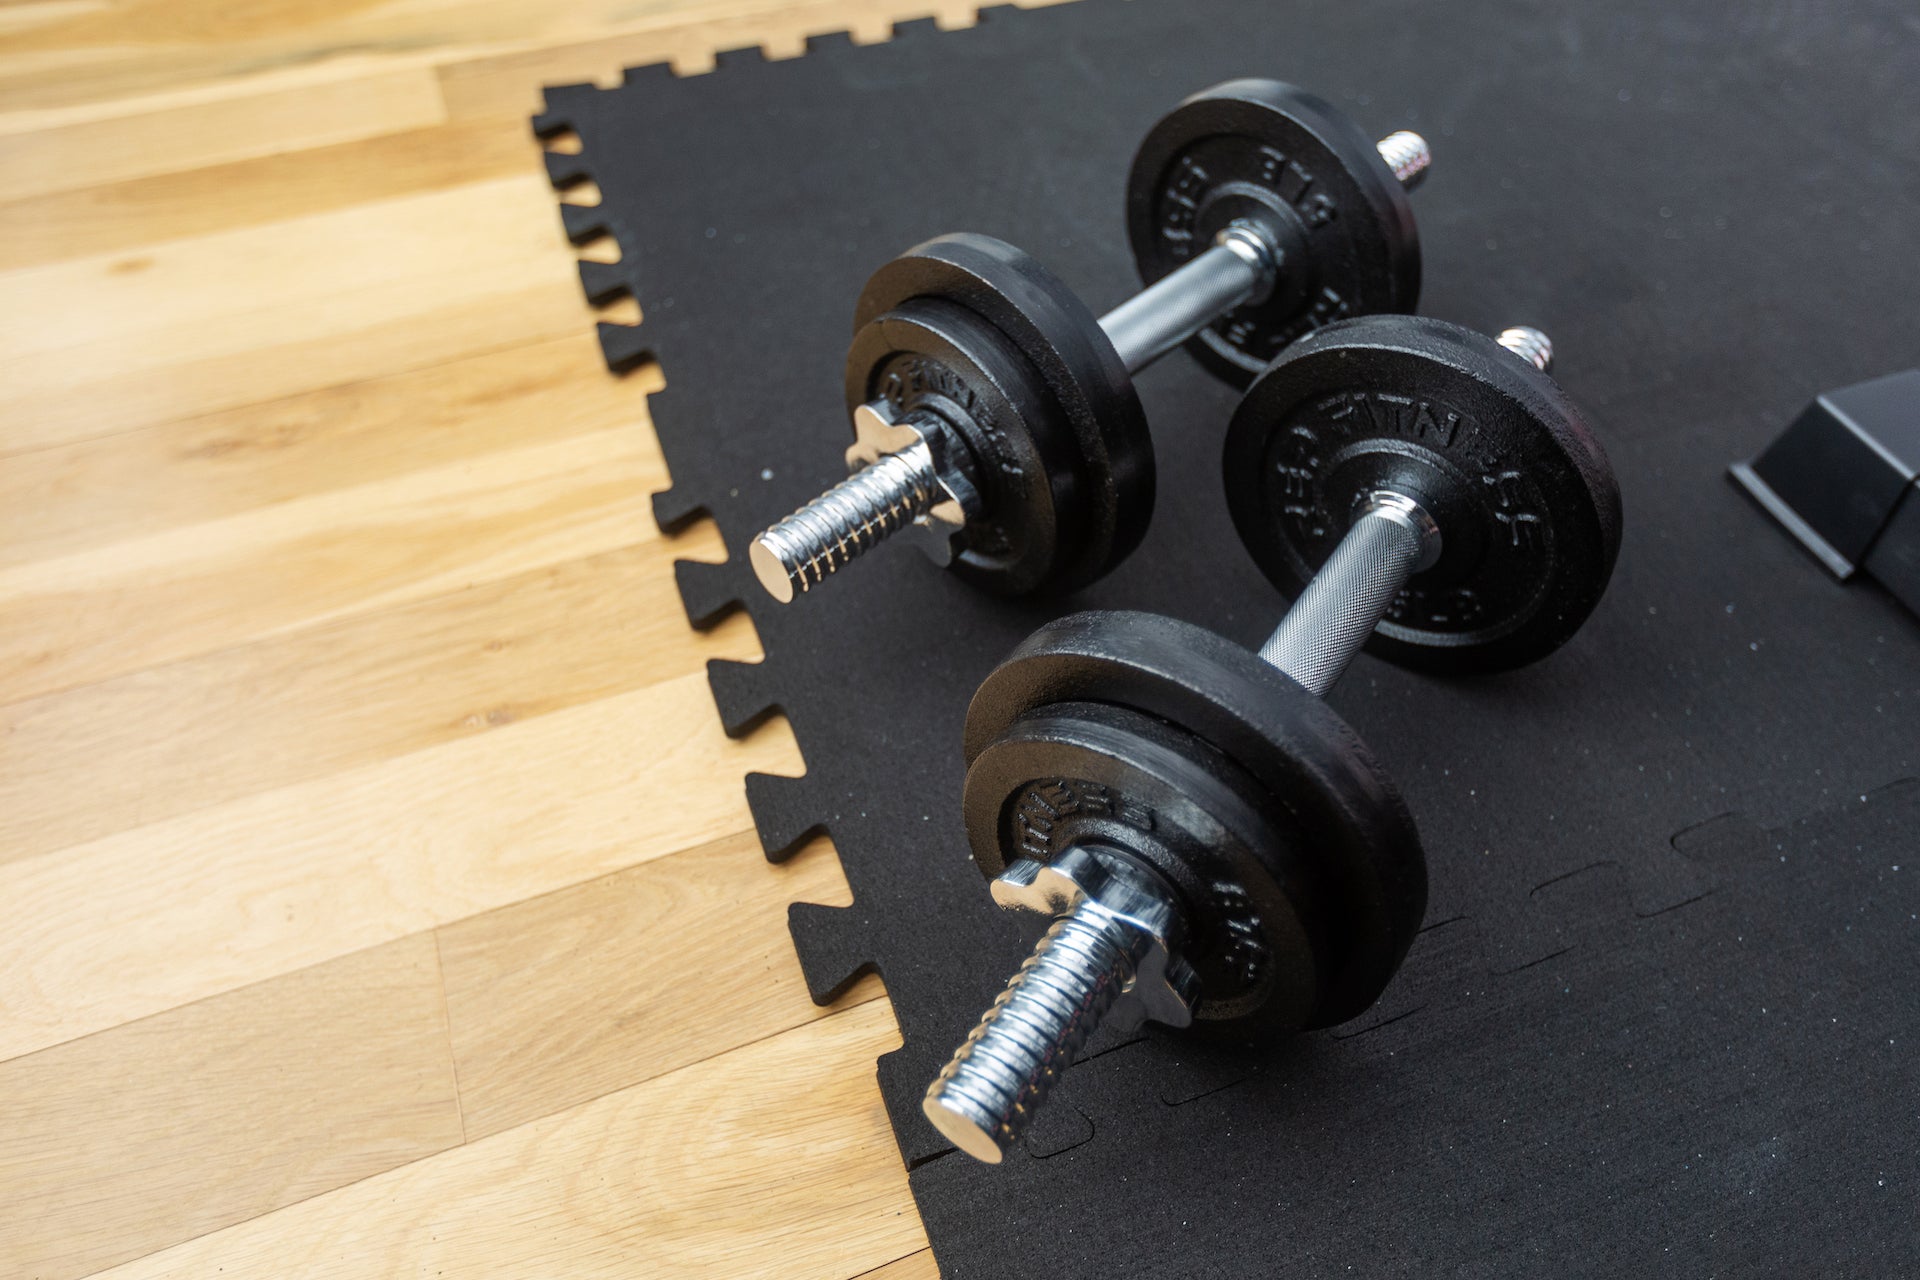 Rubber floor tiles with a dumbbell